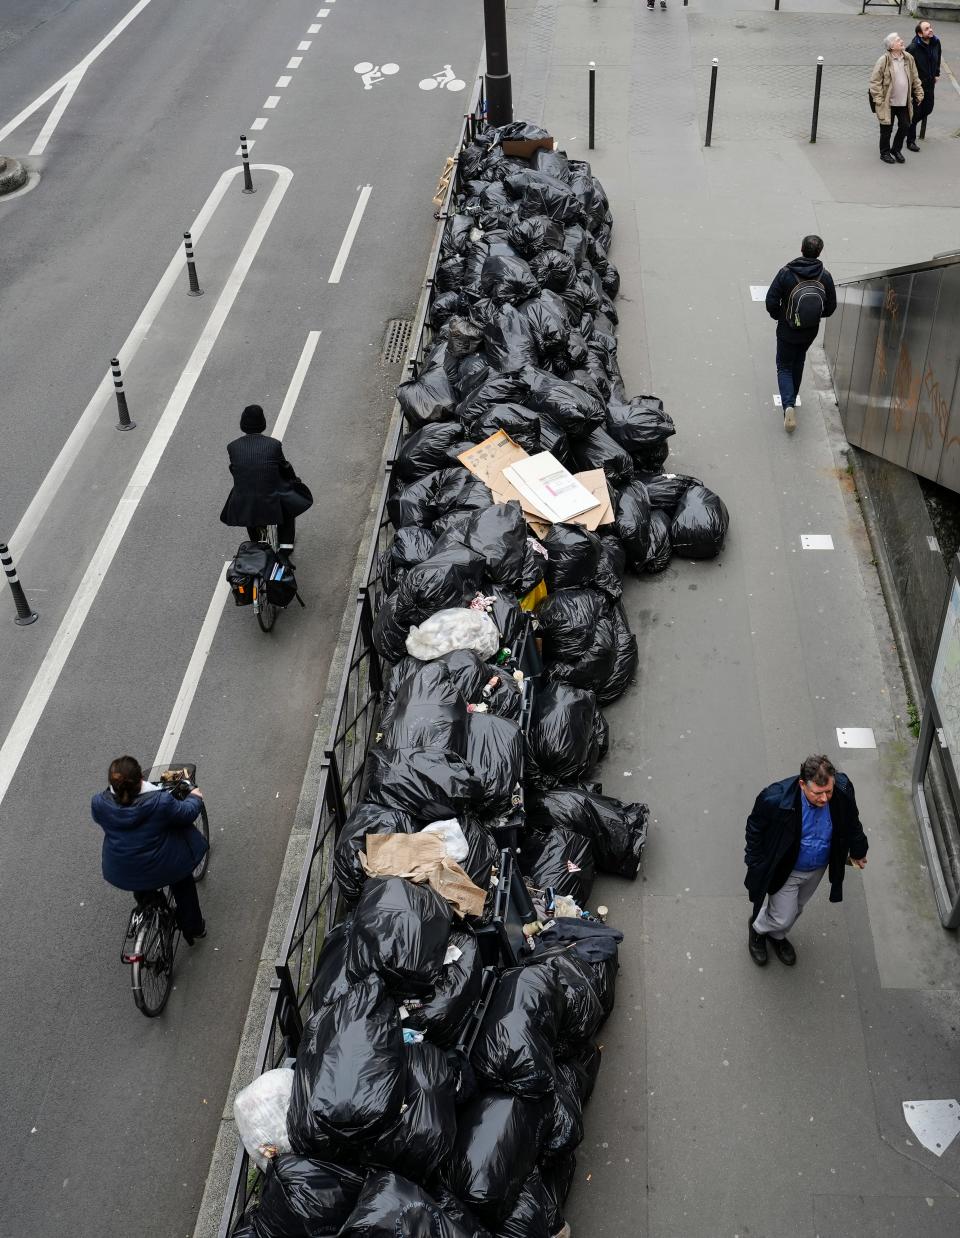 People walk and ride past uncollected garbage in Paris, Friday March 17, 2023, as sanitation workers are on strike.